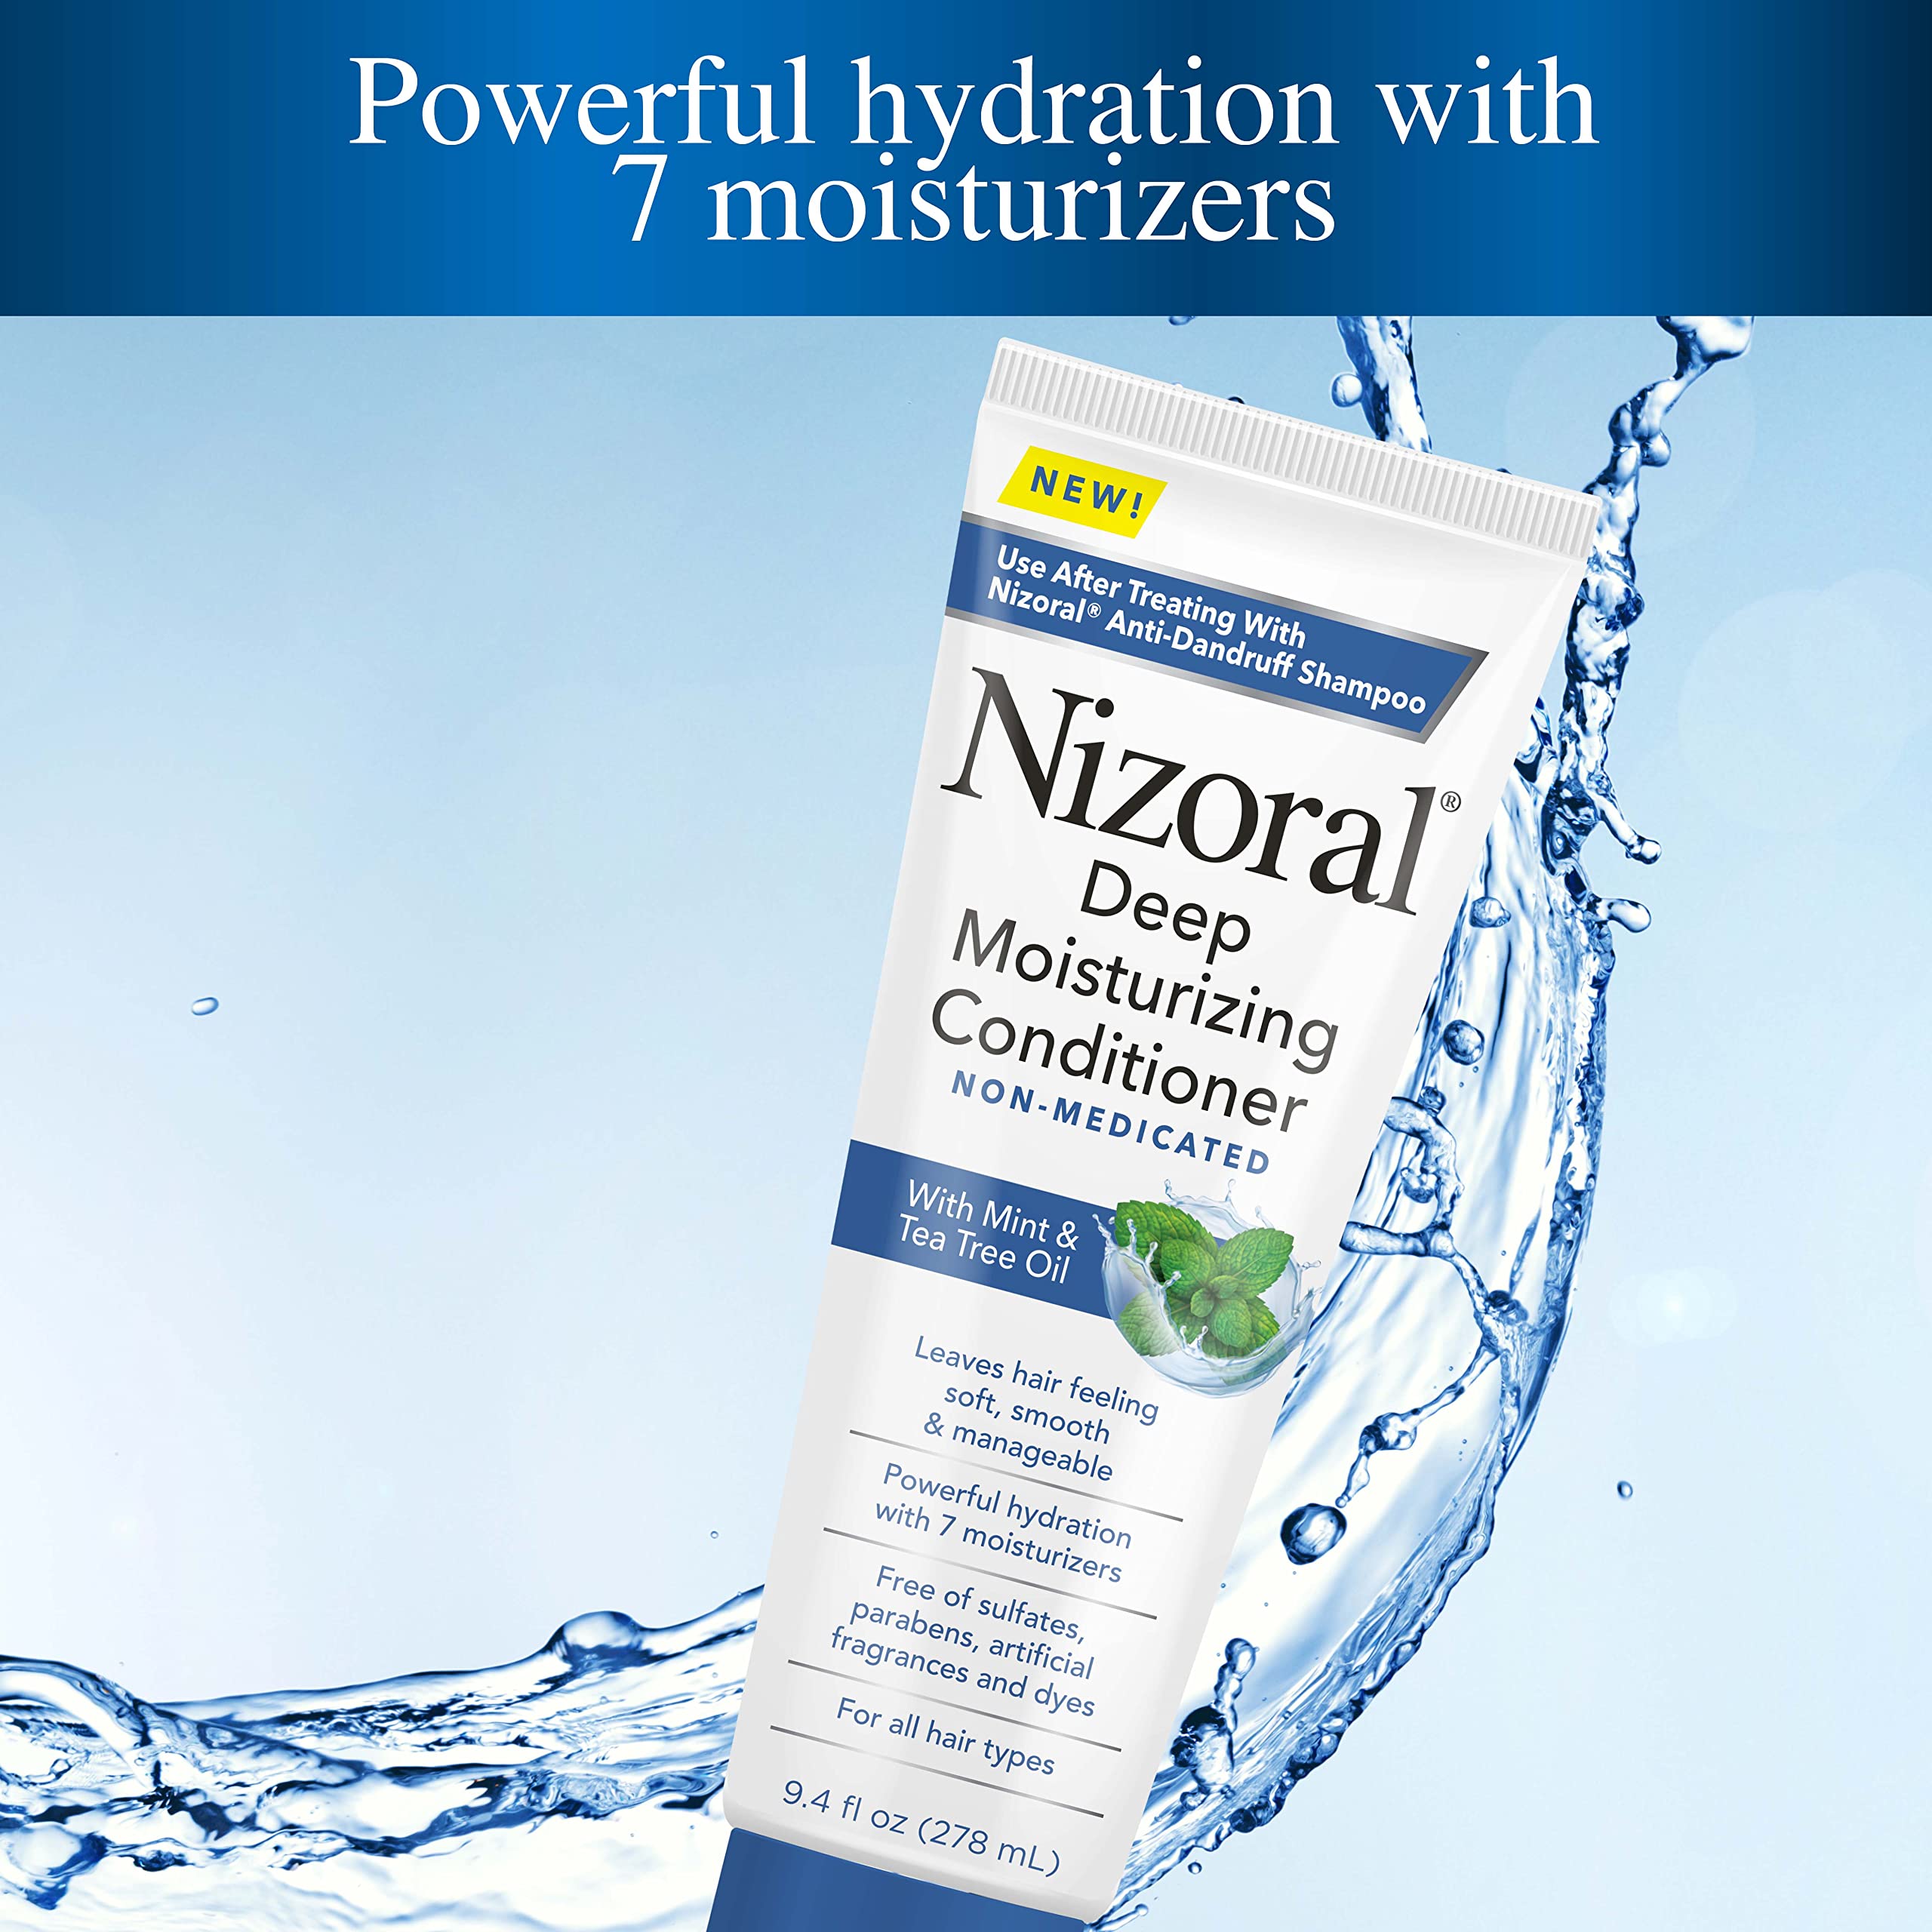 Nizoral Deep Moisturizing Conditioner with Mint & Tea Tree Oil for All Hair Types - Free of Sulfates, Parabens, Artificial Fragrances and Dyes, 9.4 oz